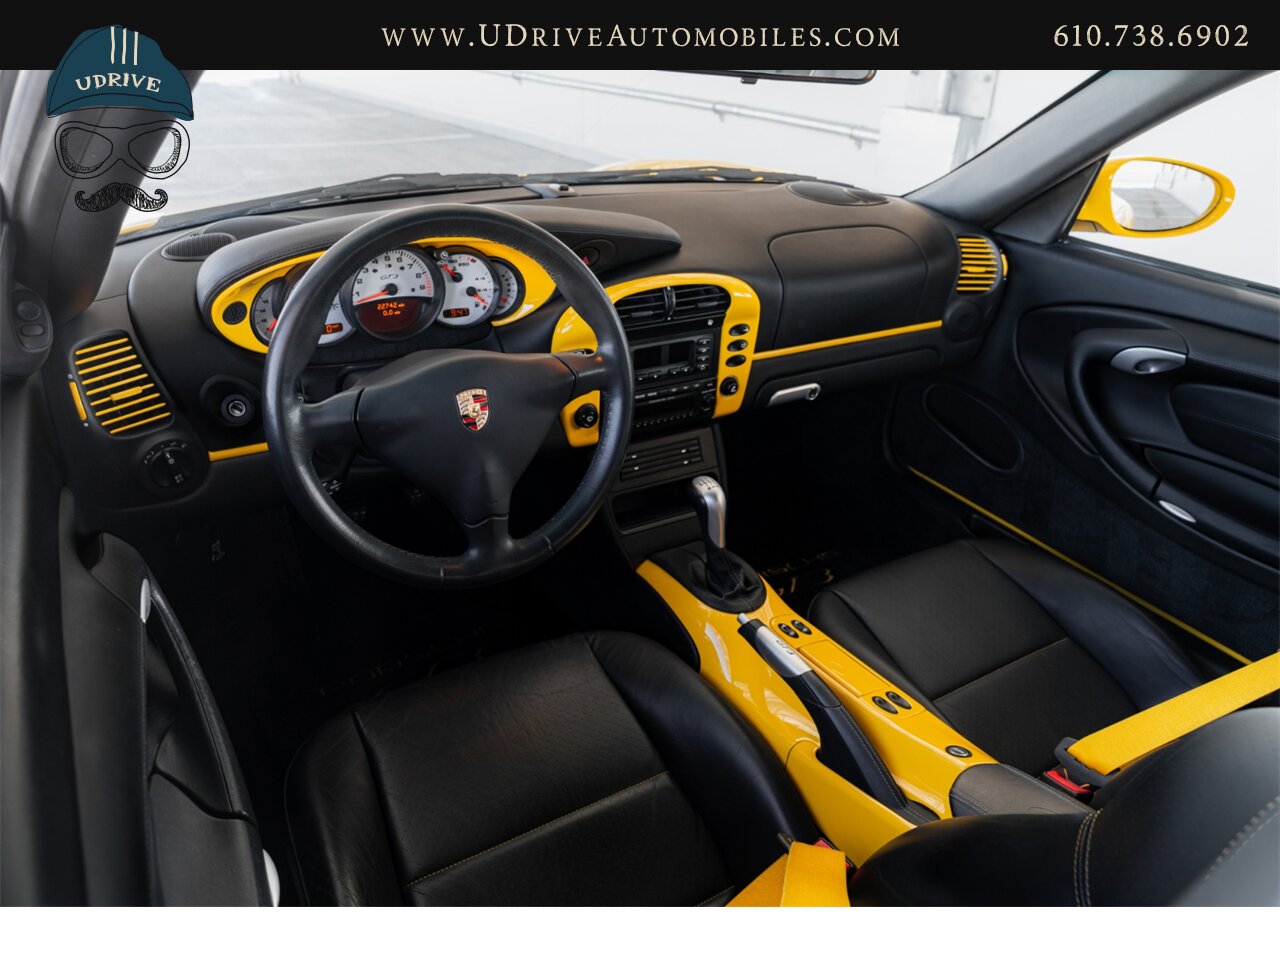 2005 Porsche 911 GT3 996 Speed Yellow Sport Seats Pntd Hardbacks  Pntd Console Deviating Stitch Yellow Accents Throughout - Photo 6 - West Chester, PA 19382